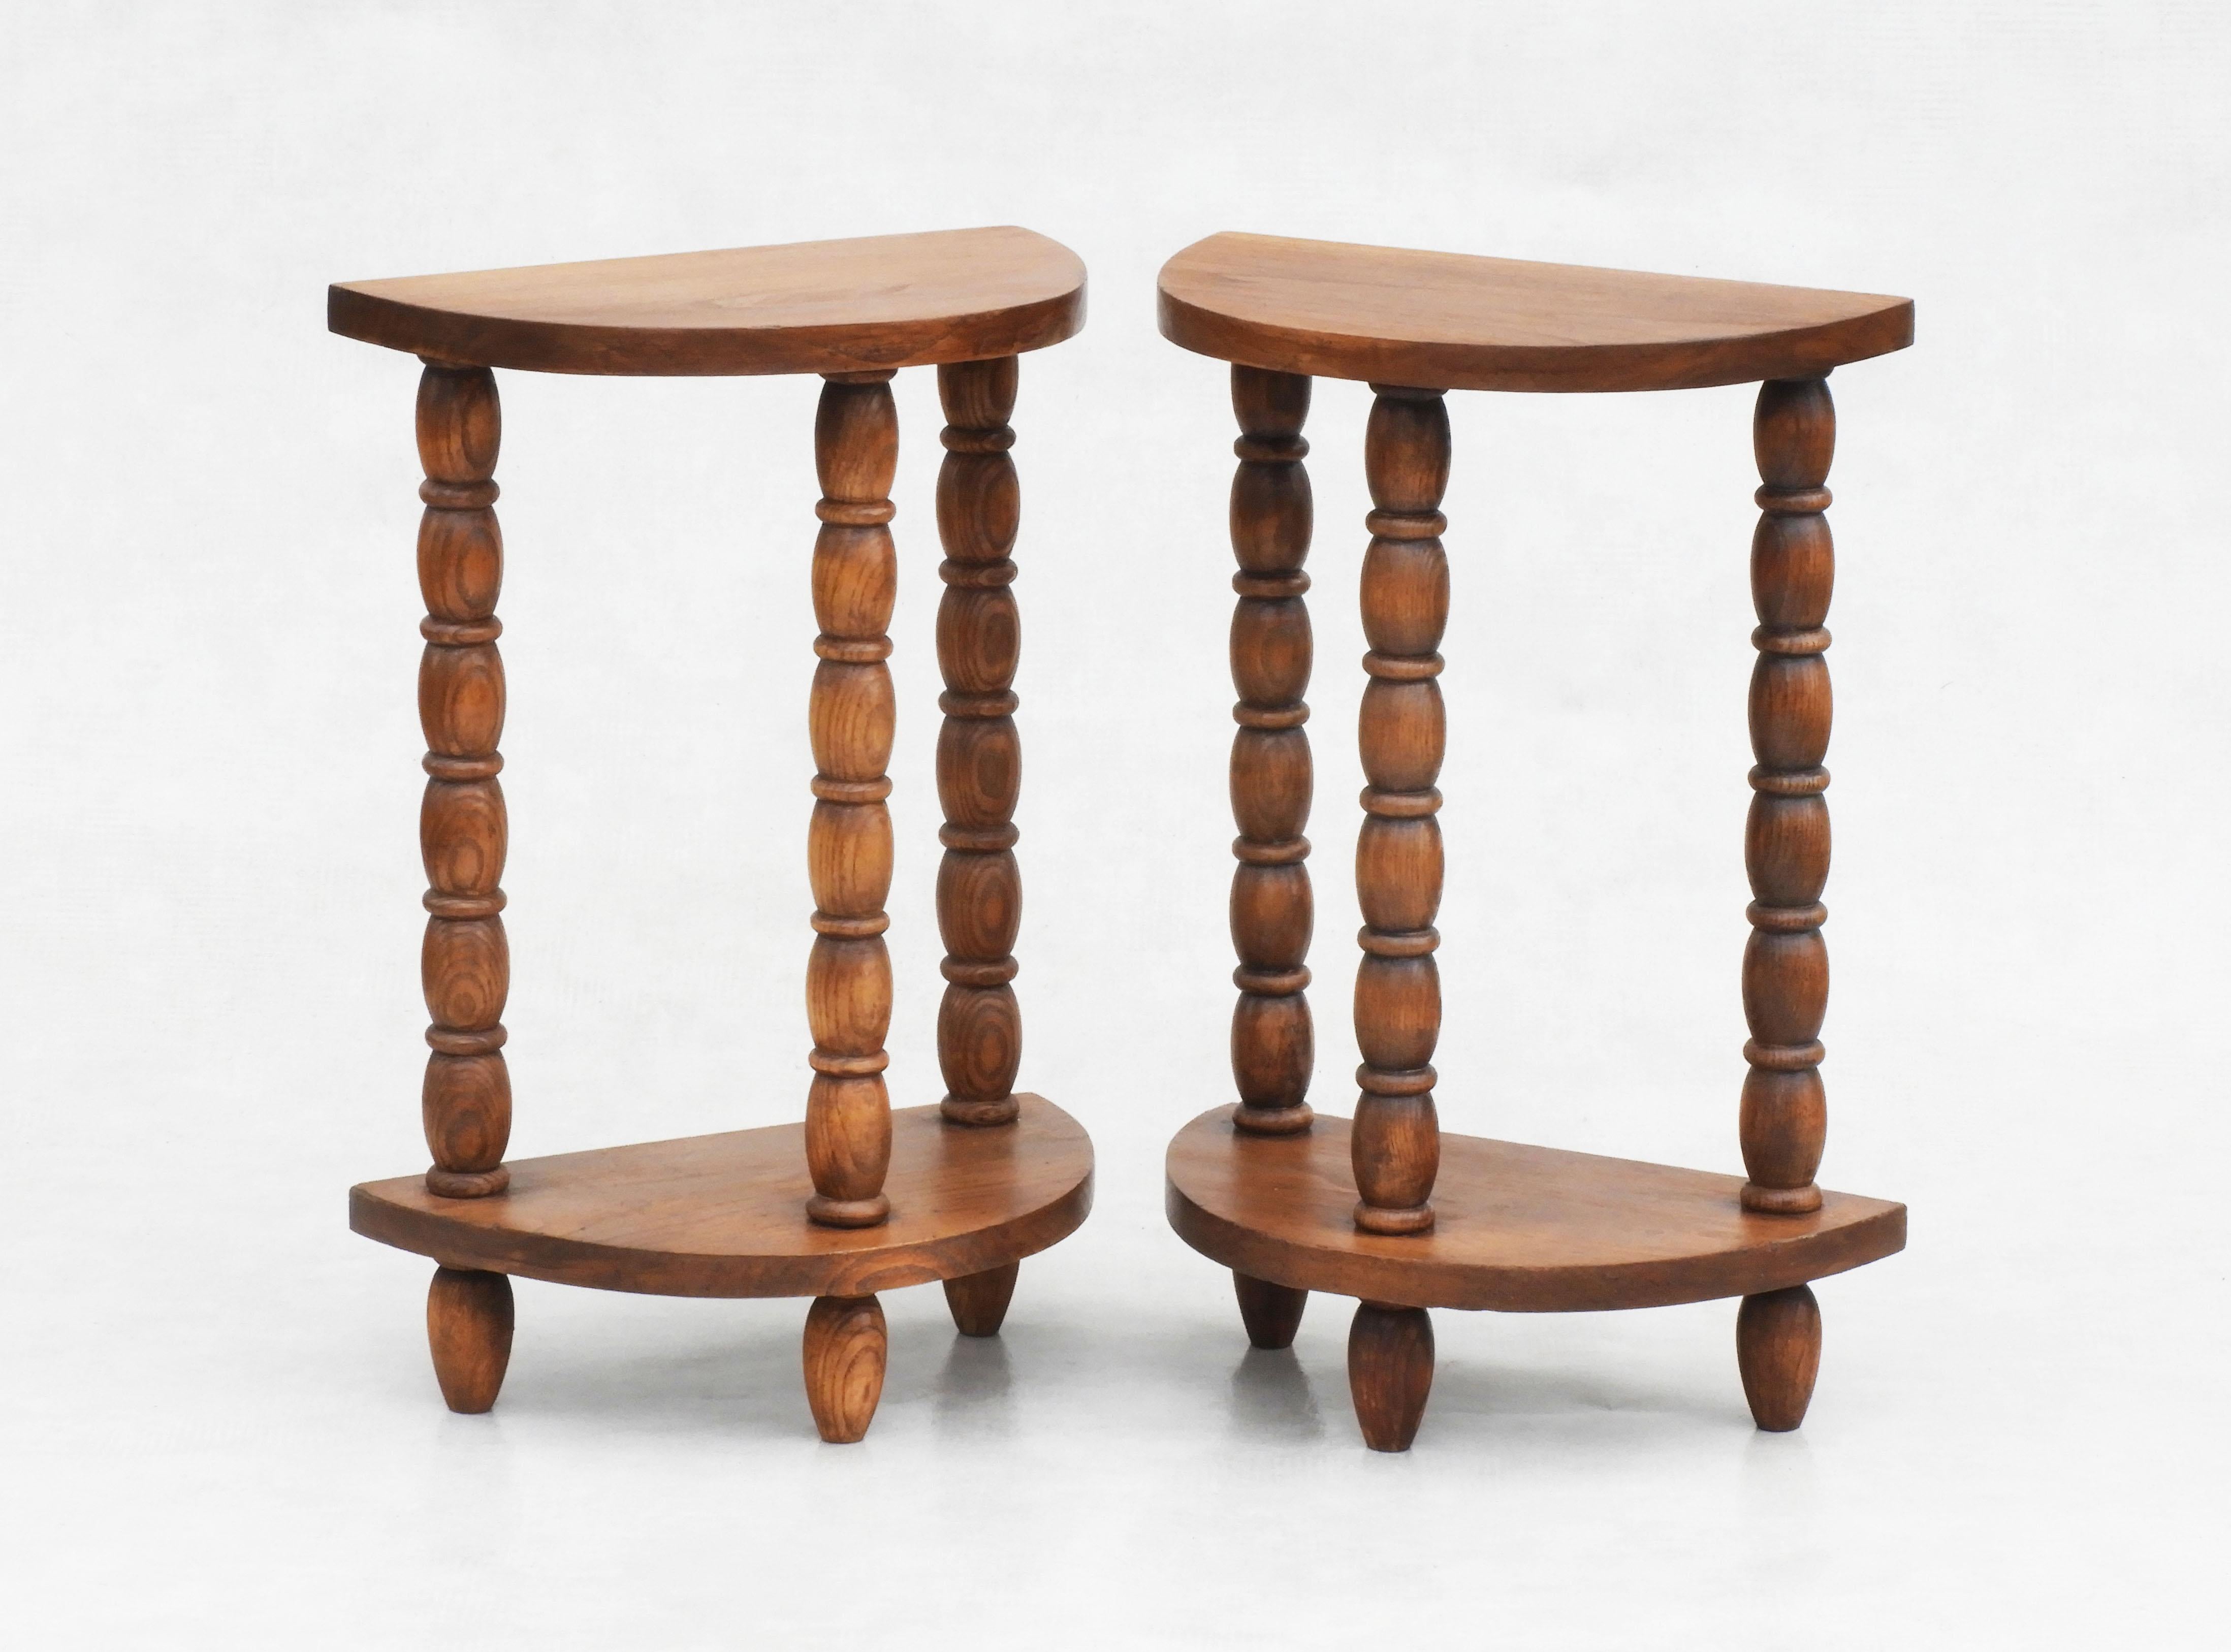 A great pair of end side tables or nightstands in the style of Charles Dudouyt C1940.   Beautifully turned golden oak, half moon tables with good grain and nice patina. These tables have a timeless quality that lets them sit easily within a wide